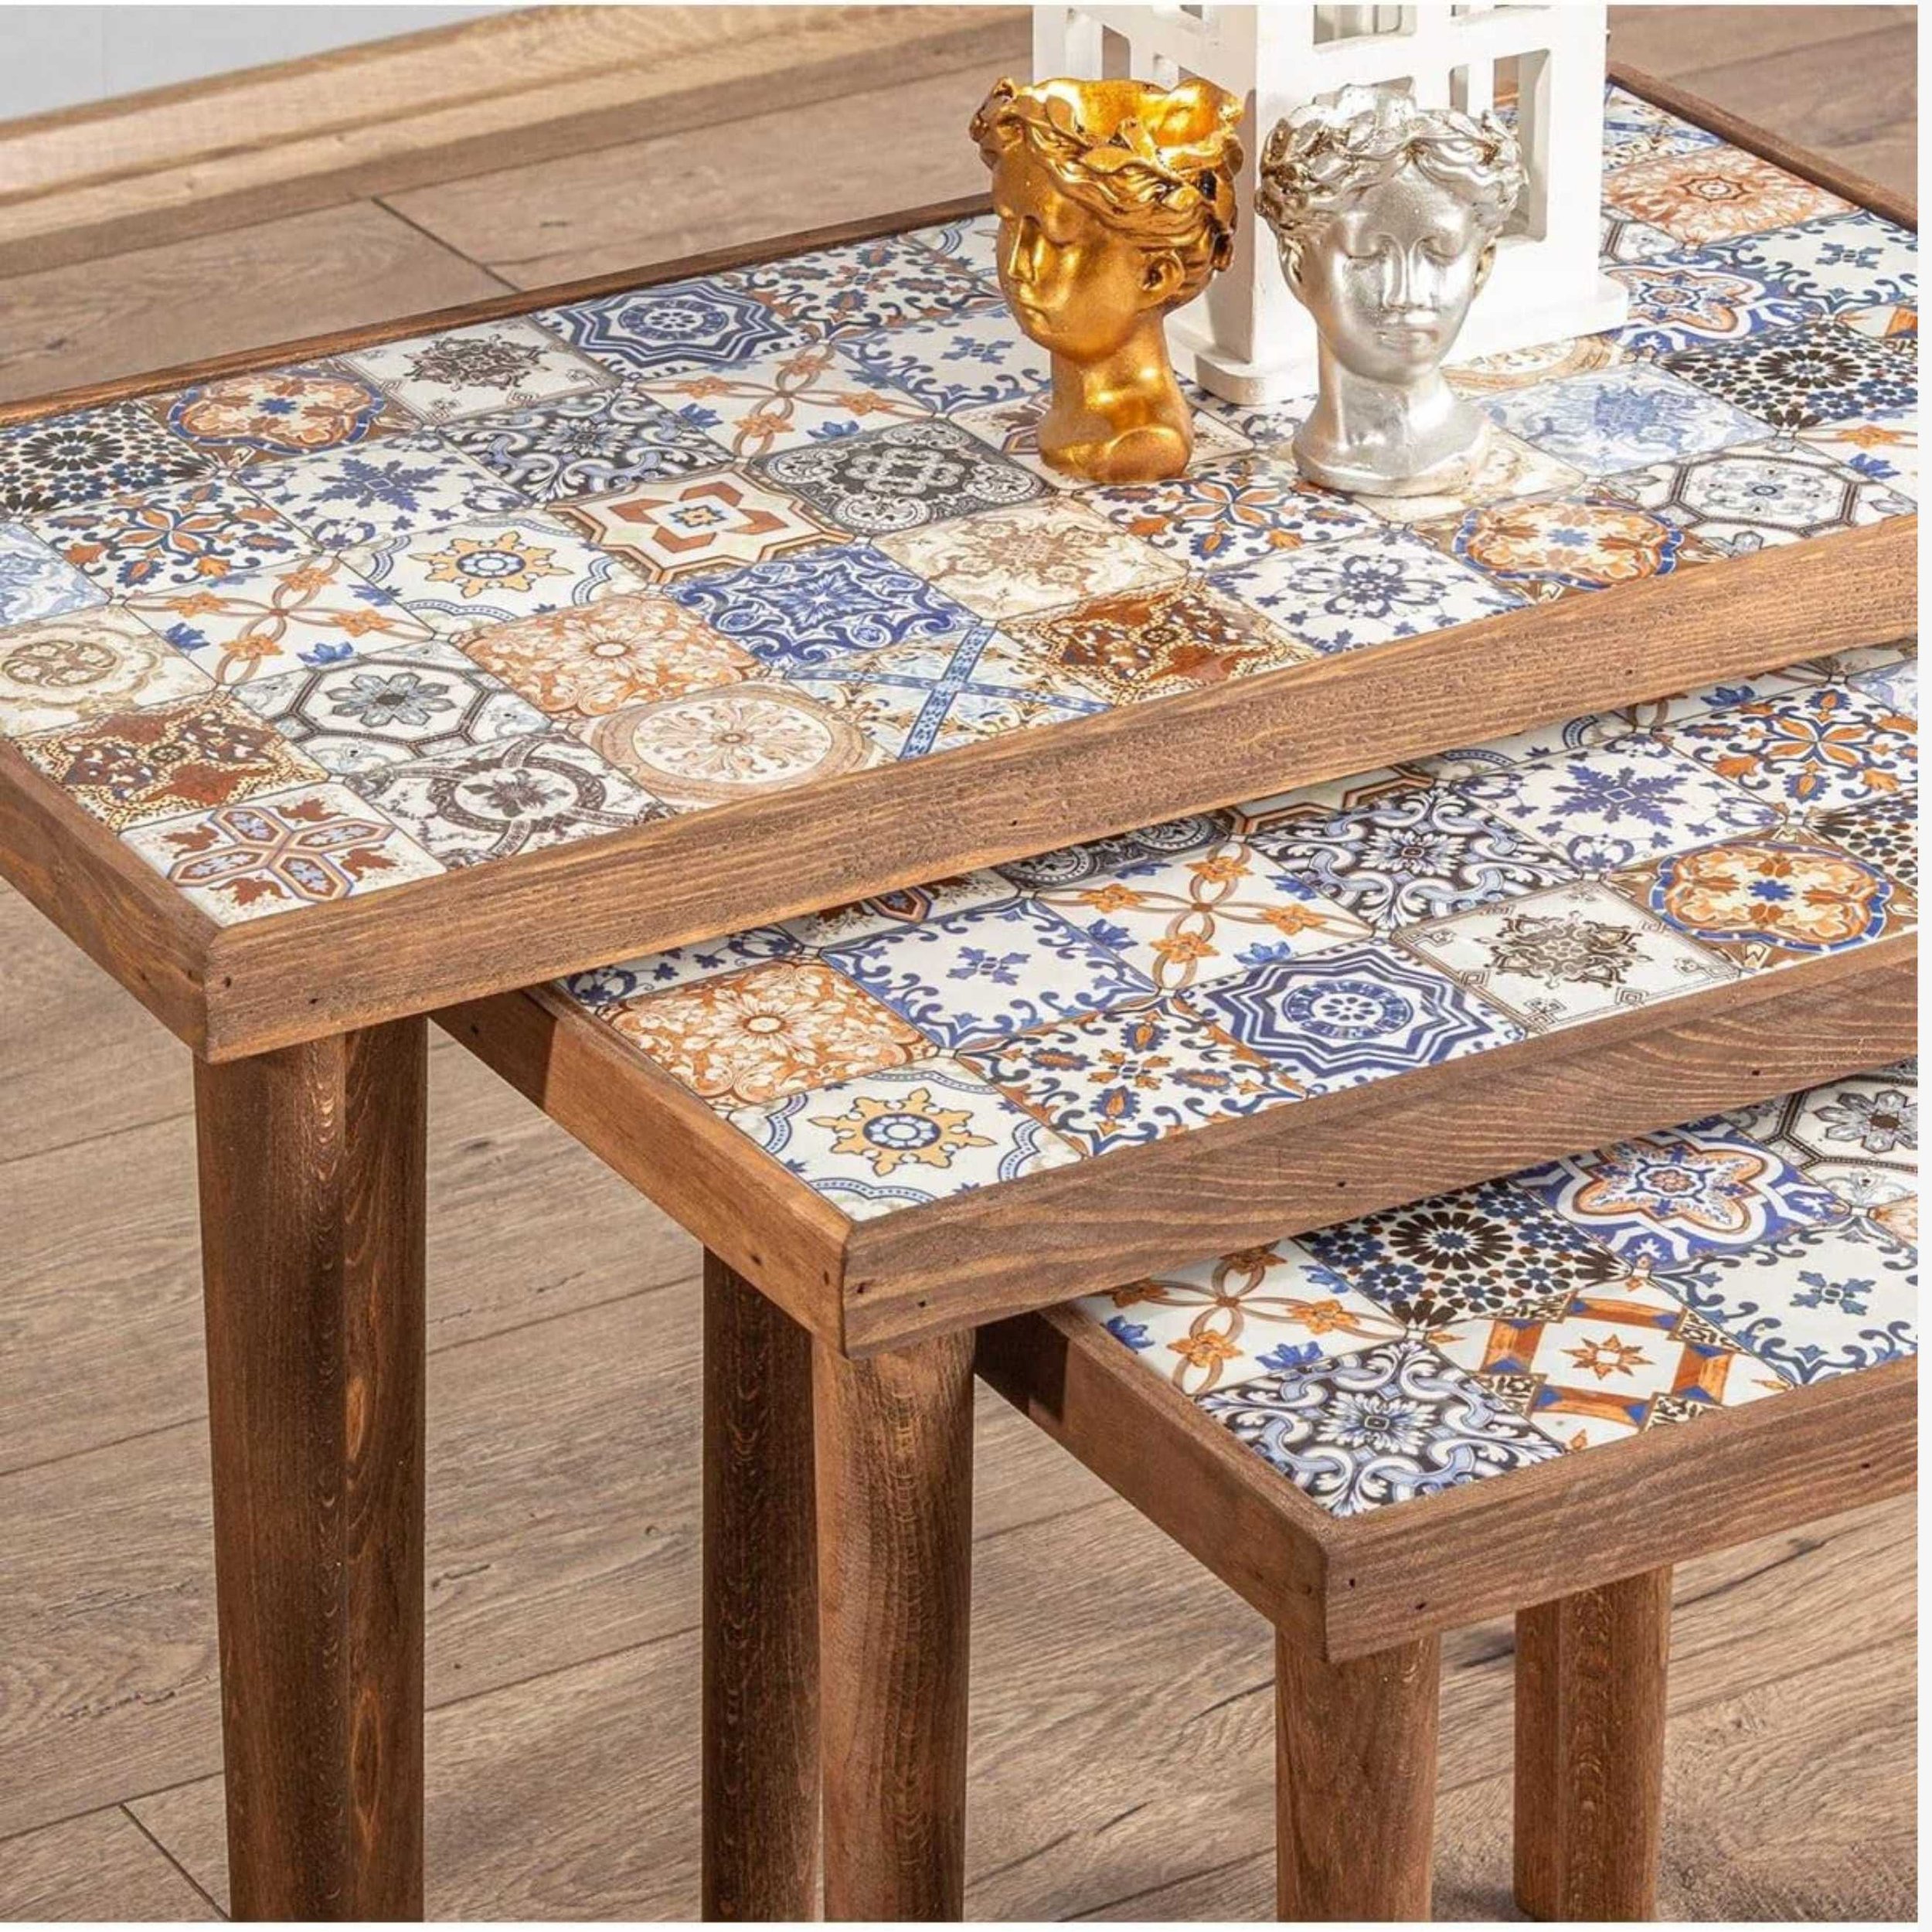 Hand Crafted Tile Top Wood Nesting Tables.jpg